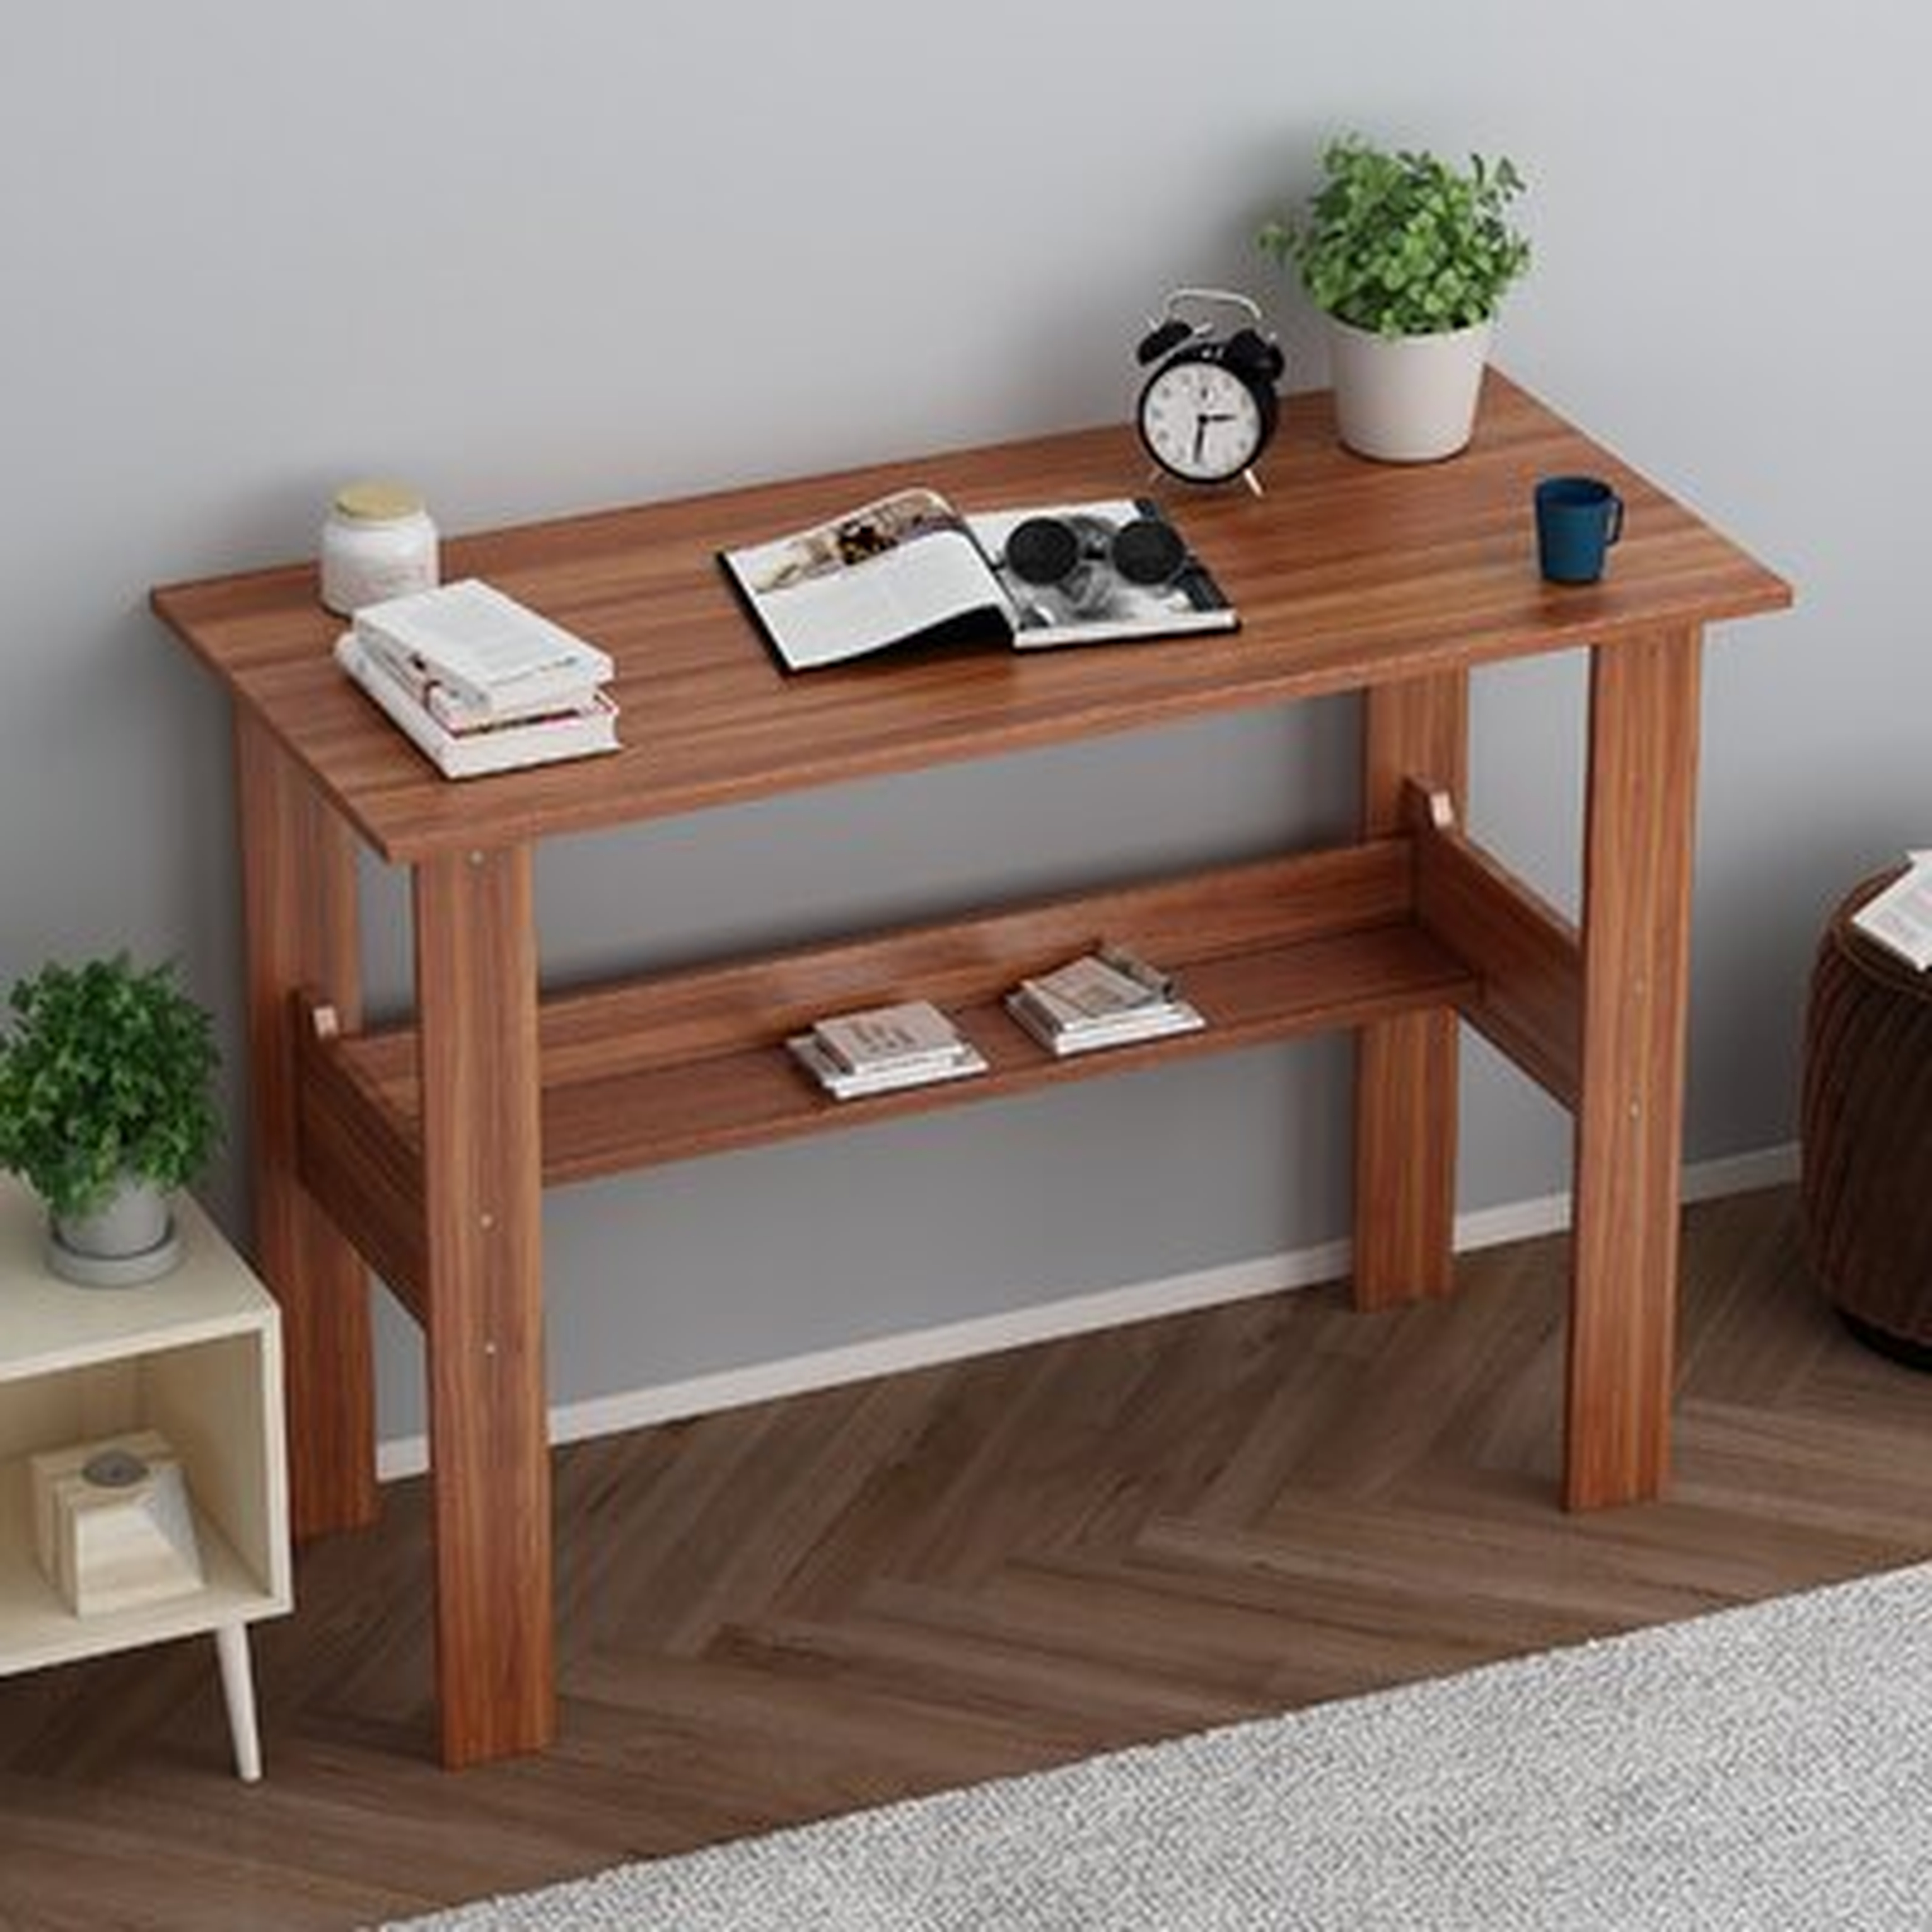 Computer Desk With Bookshelf, Large Space, MDF Durable Board, Environmental Paint, Stable Design For Home Office - Wayfair